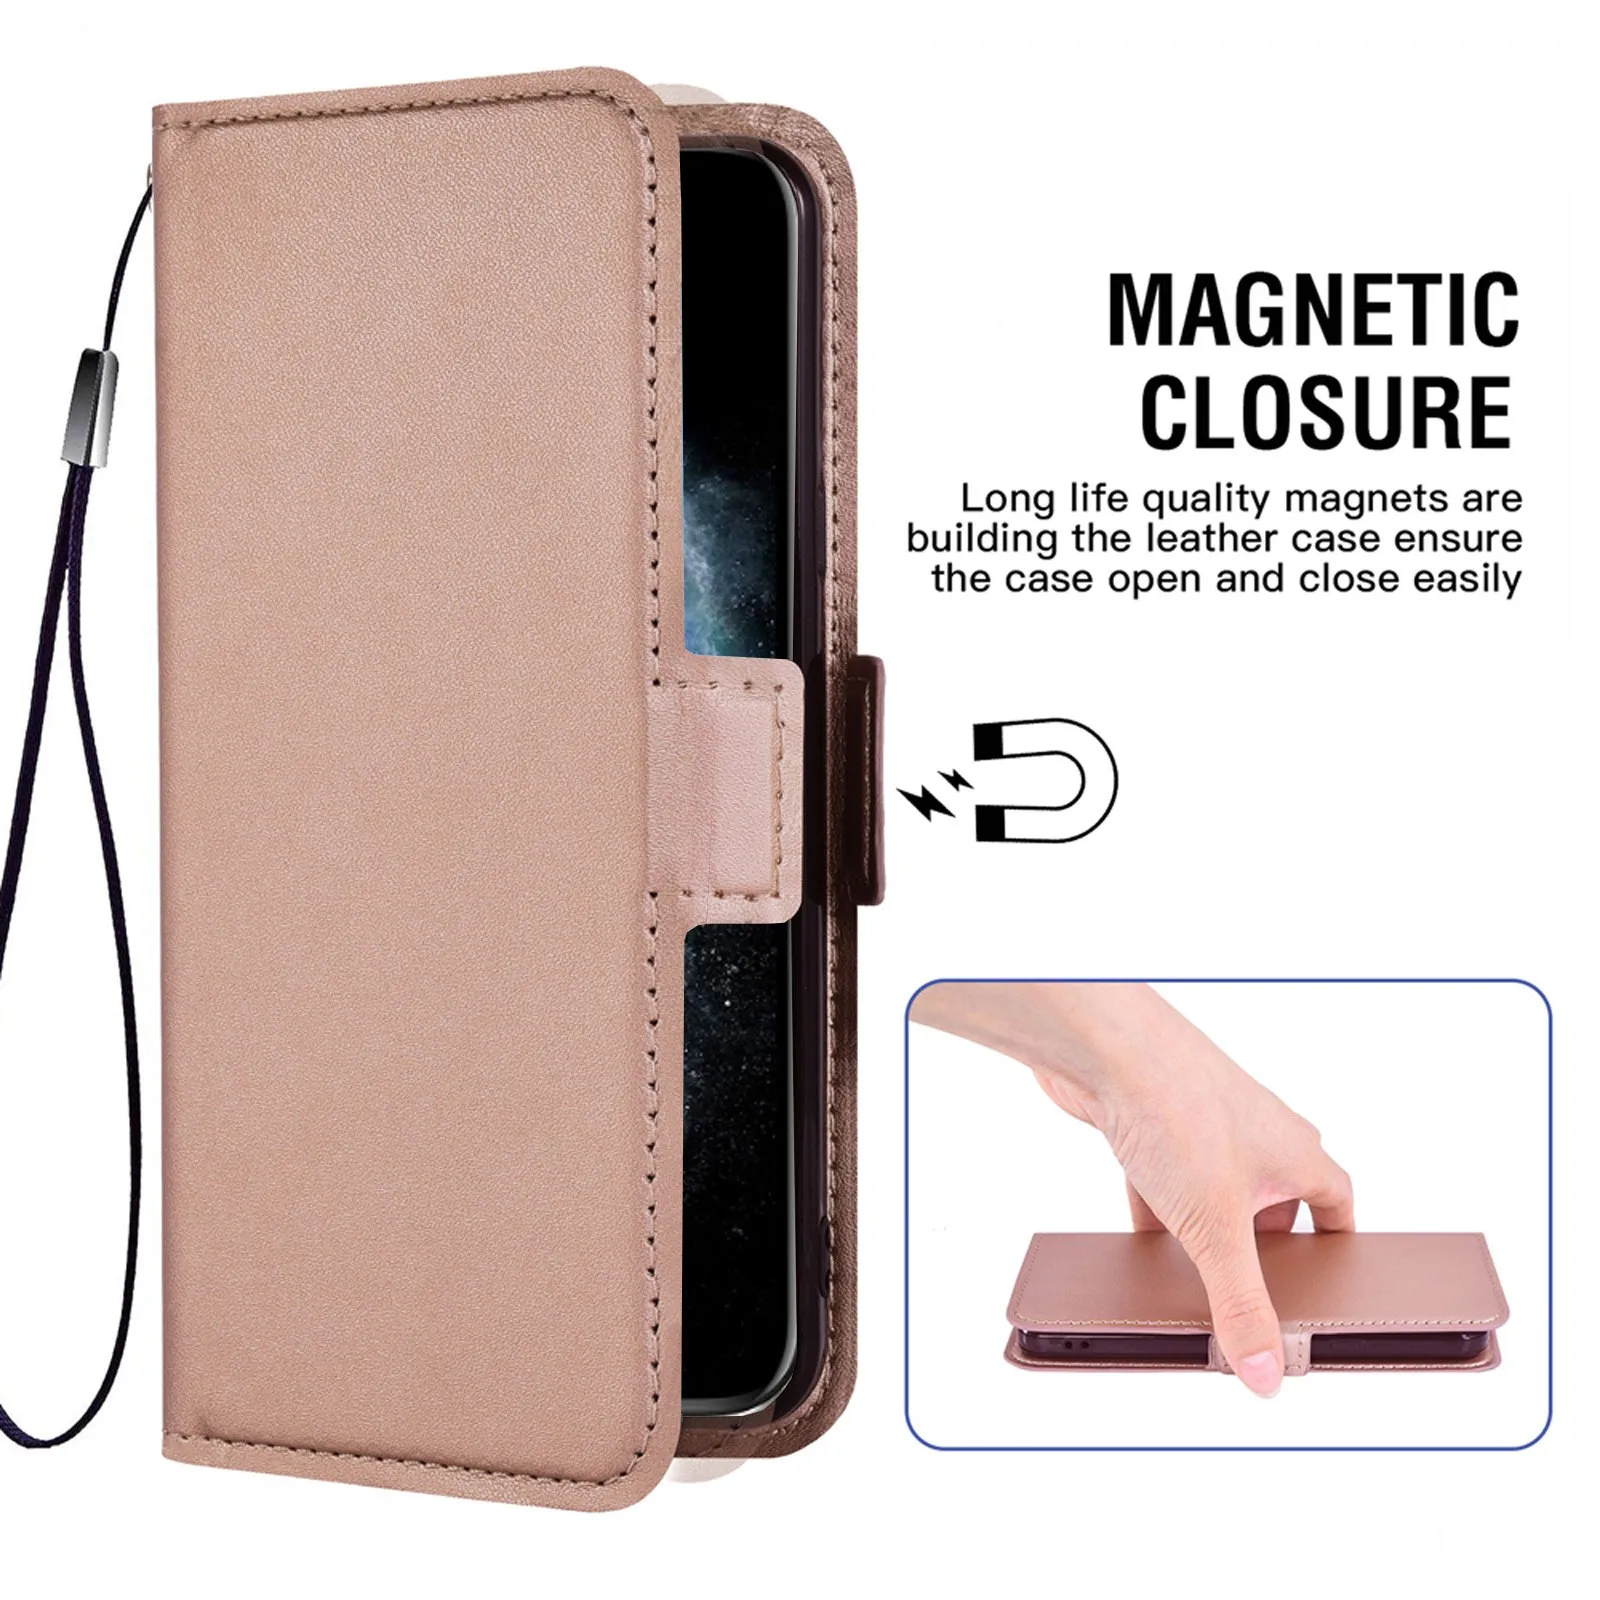 flip cover leather wallet phone case for tecno pova 2 le7 spark 6 go 2020 5 air infinix smart 5 hot 10 lite x657 phantome x free global shipping